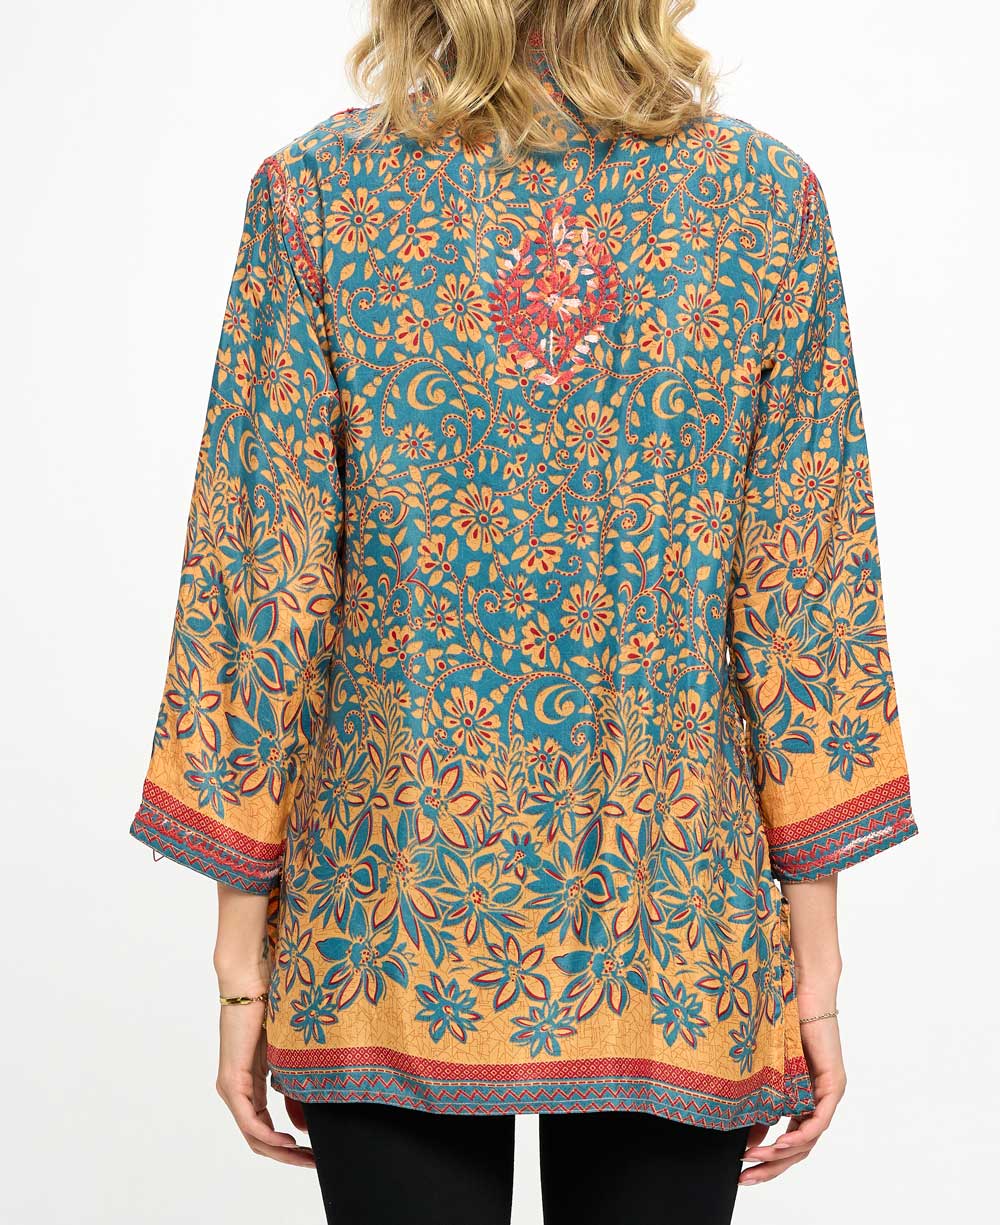 Embroidered Floral Burst Tunic Top - Shirts & Tops S